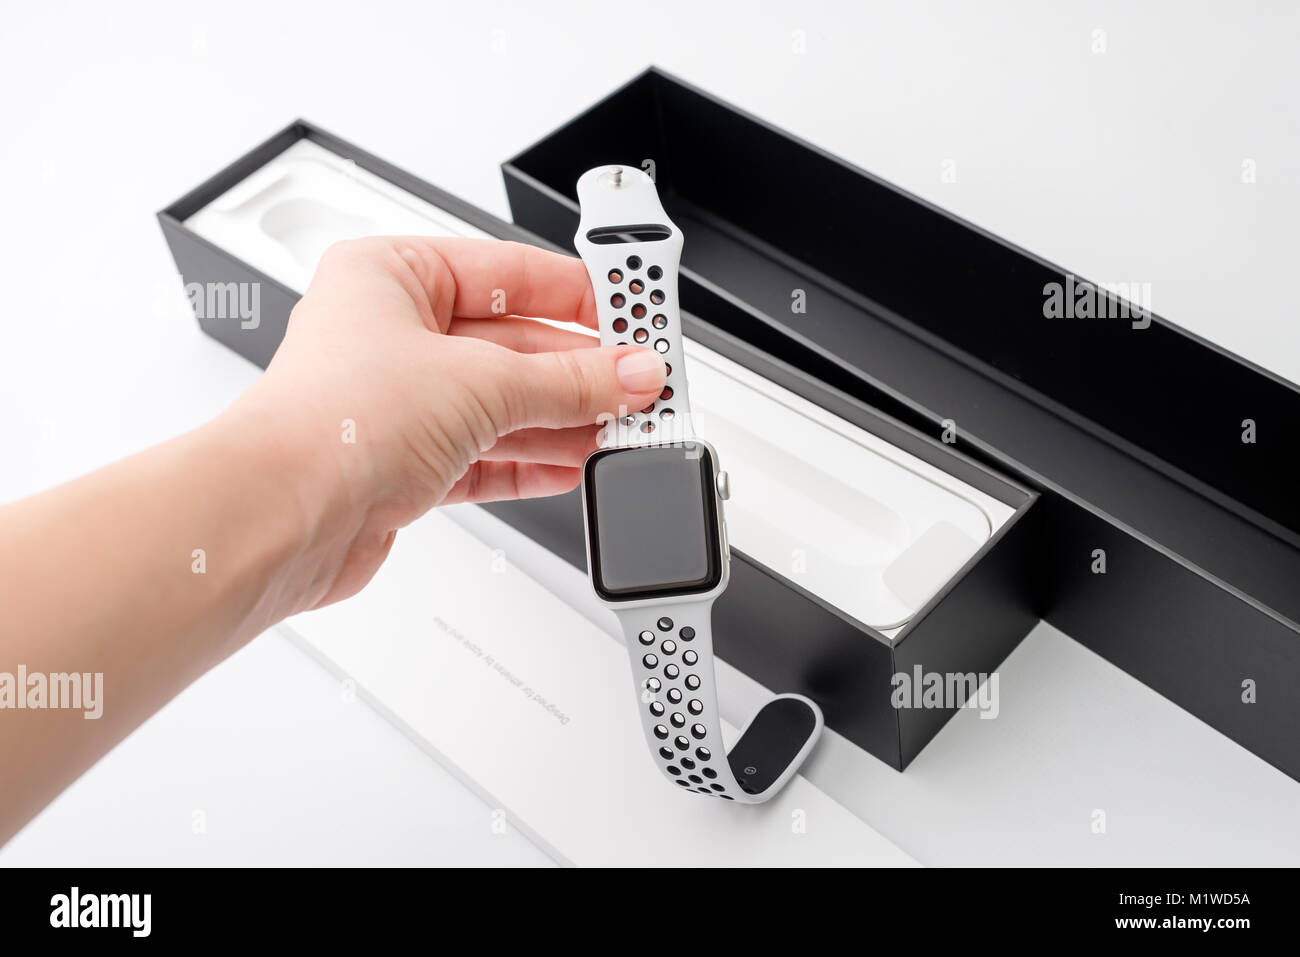 Apple Nike Watch High Resolution Stock Photography and Images - Alamy